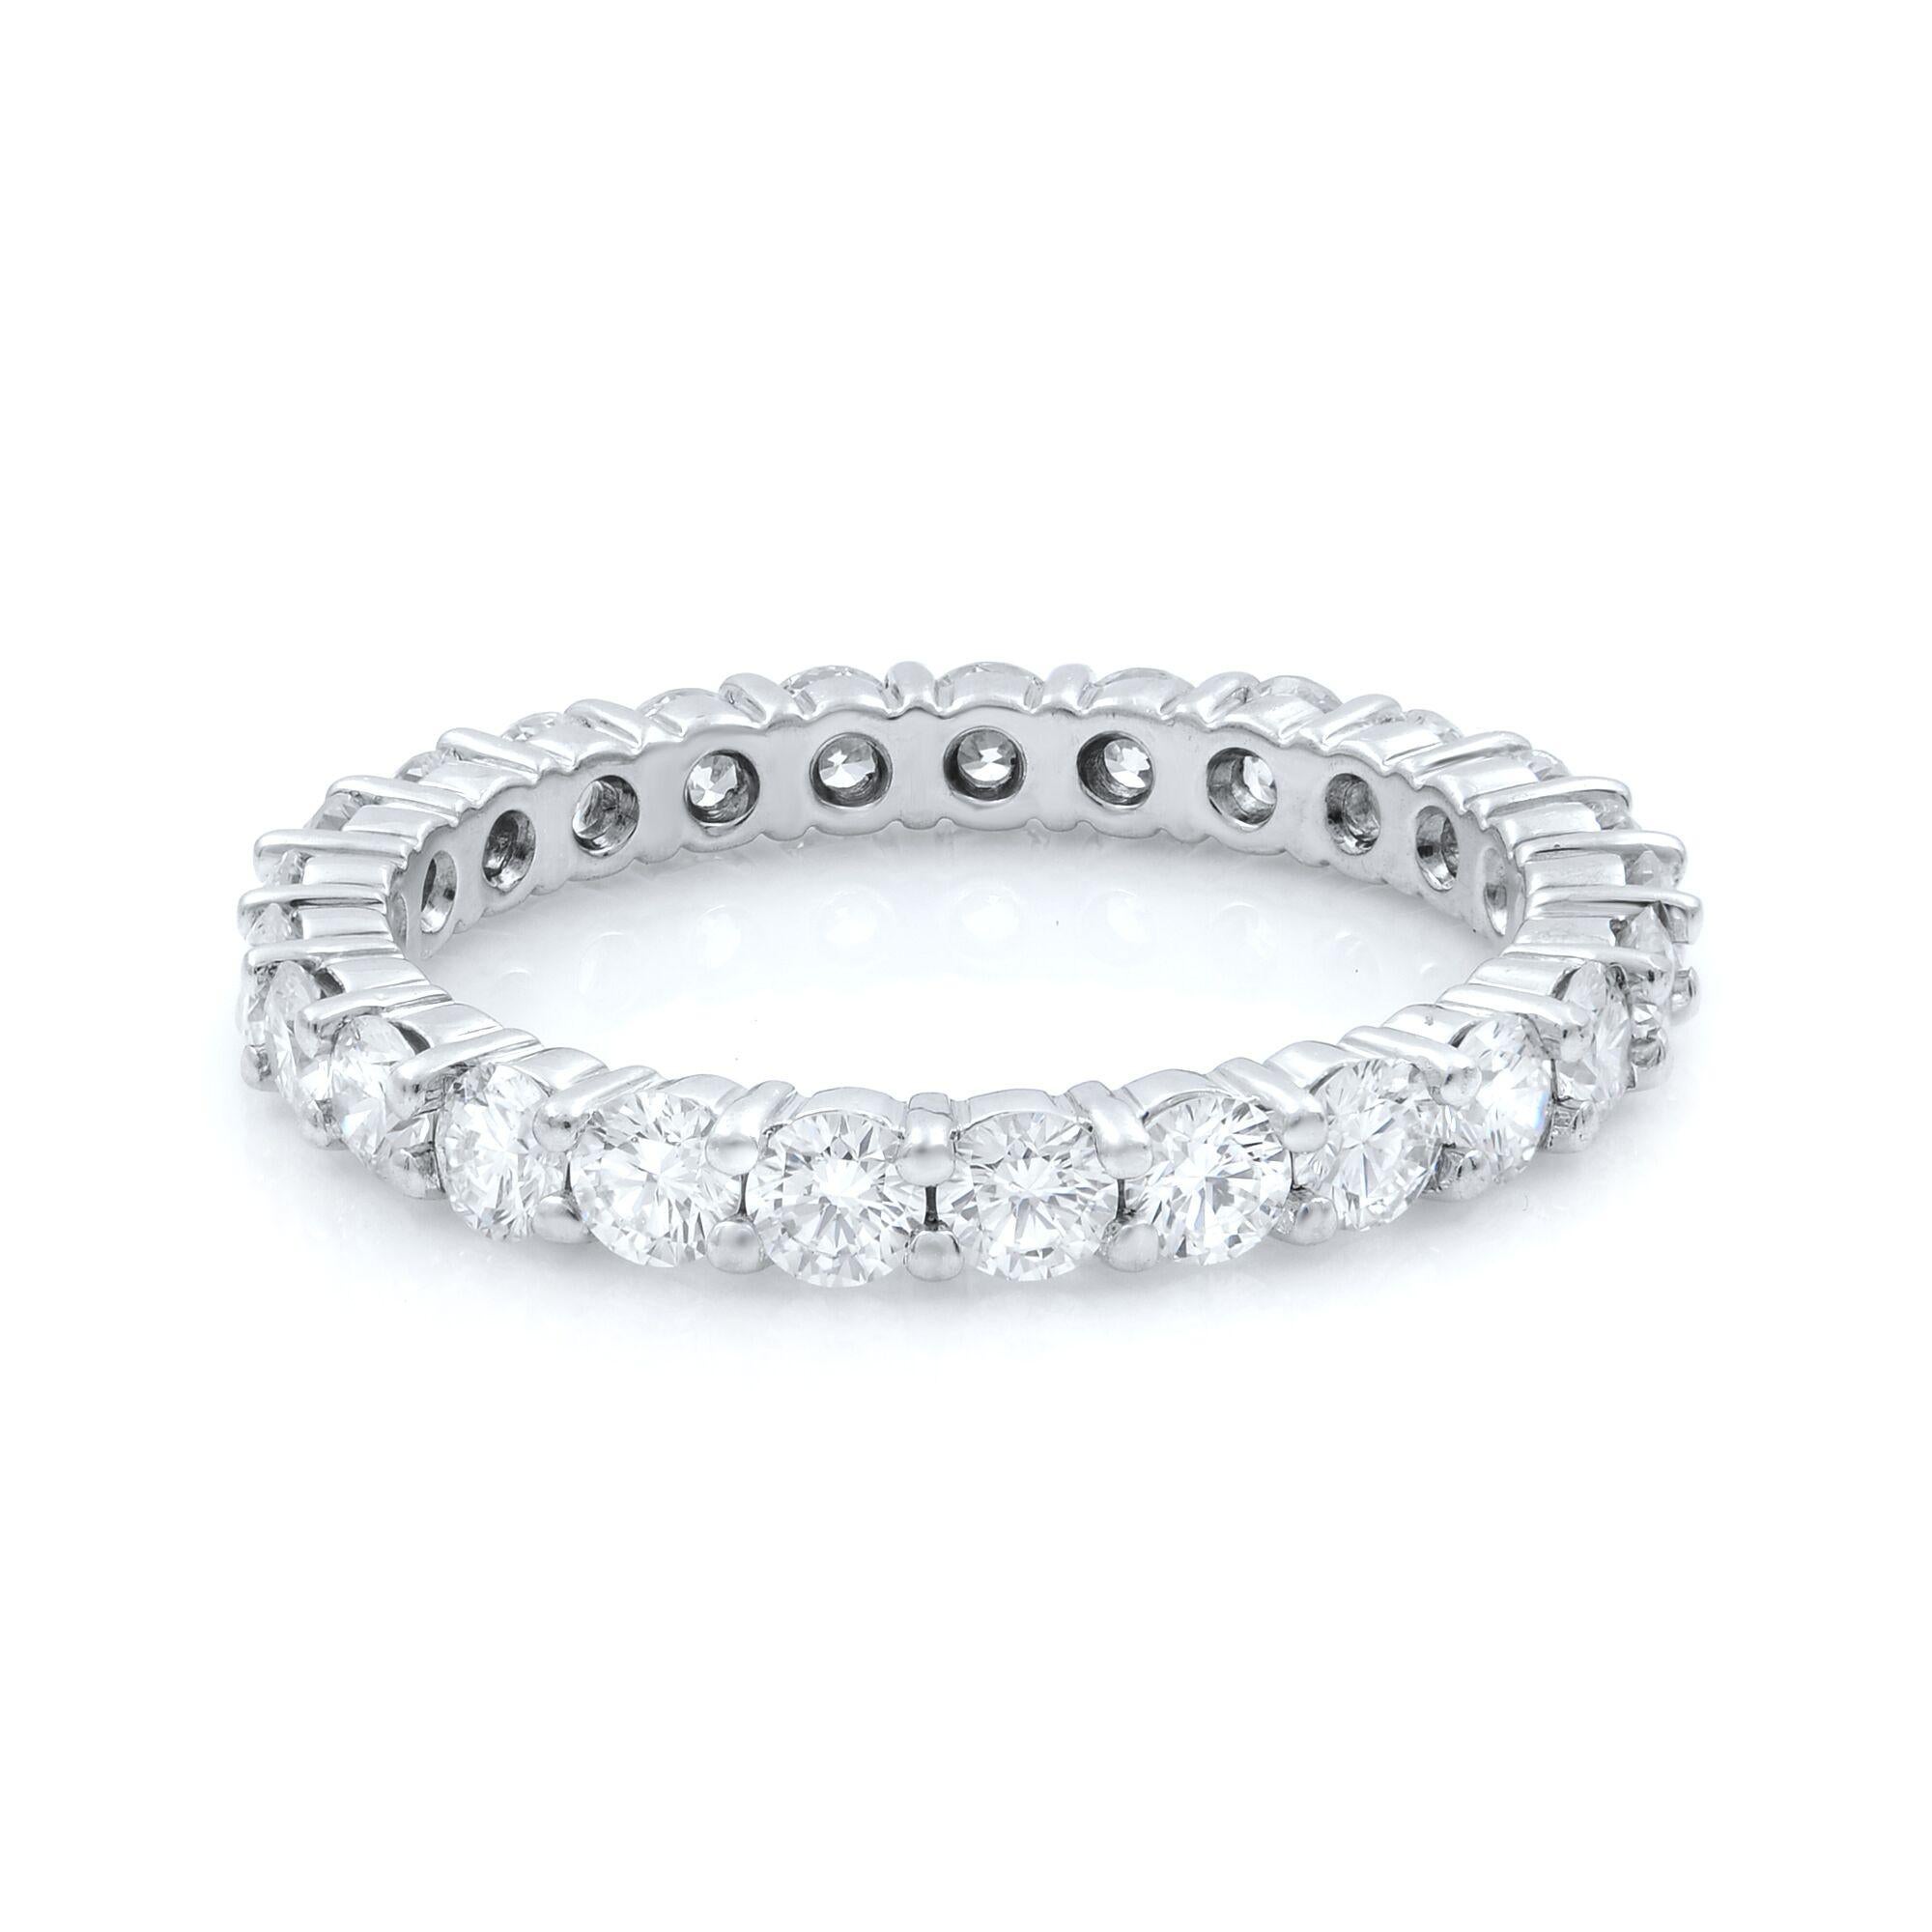 Rachel Koen Round Cut Diamond Eternity Band 14K White Gold 1.65cttw In New Condition For Sale In New York, NY